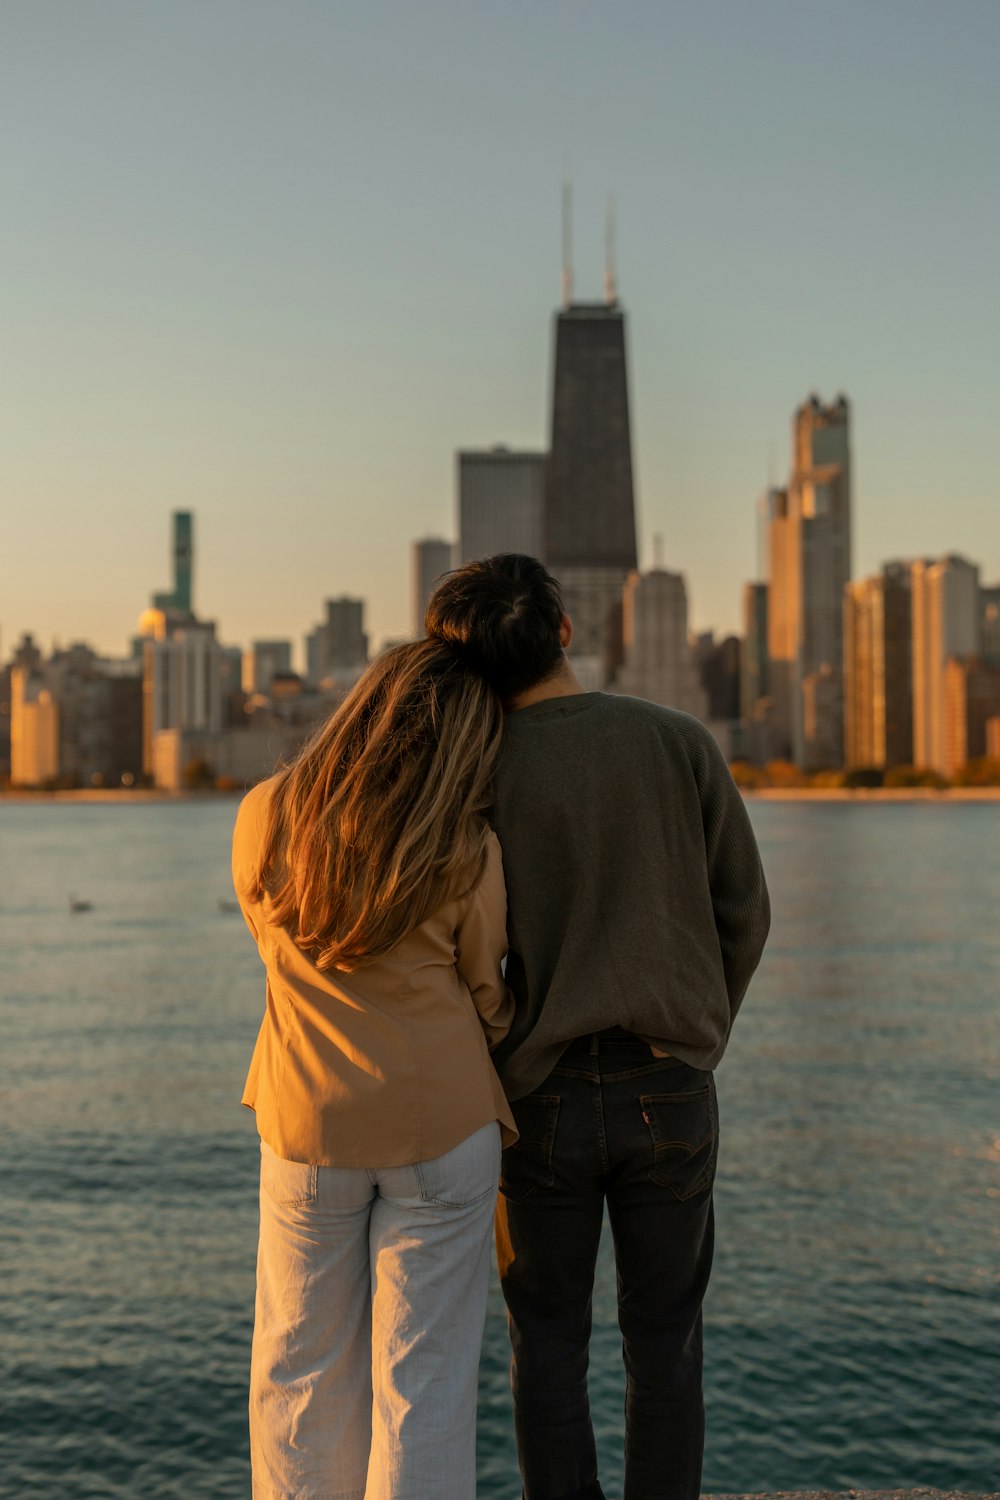 a man and woman kissing in front of a body of water with a city in the background